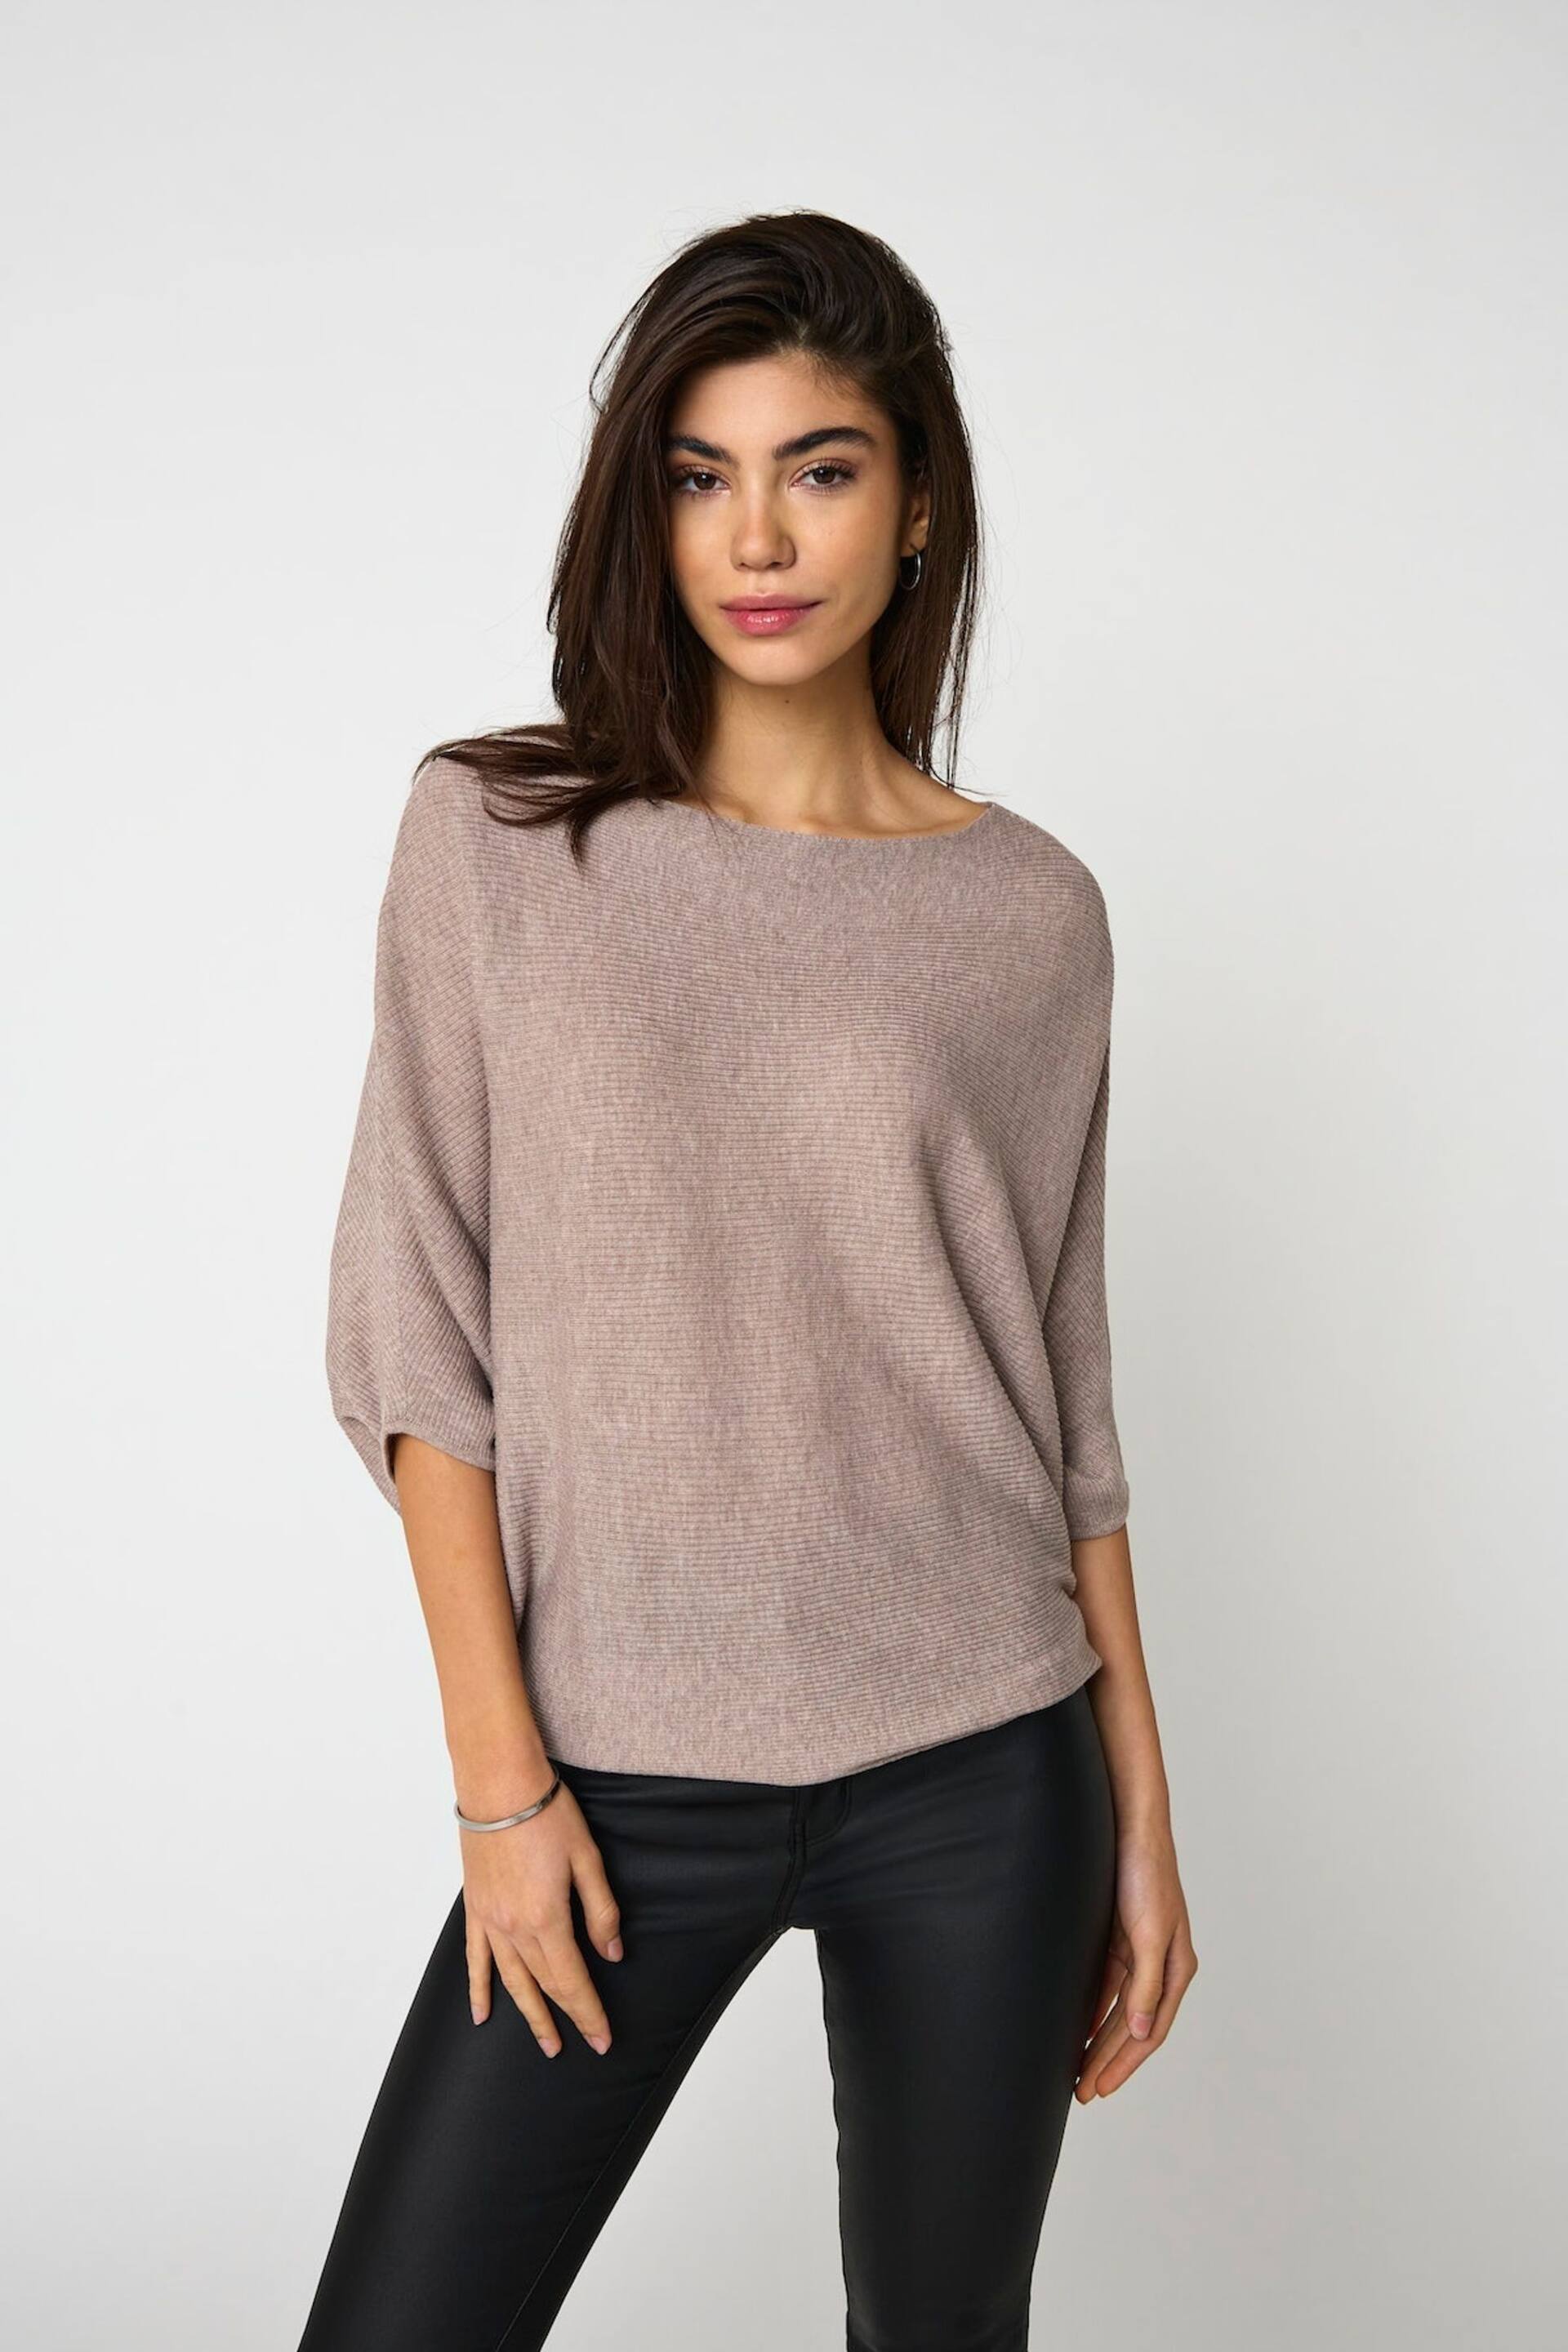 JDY Grey Knitted Batwing Jumper - Image 1 of 6